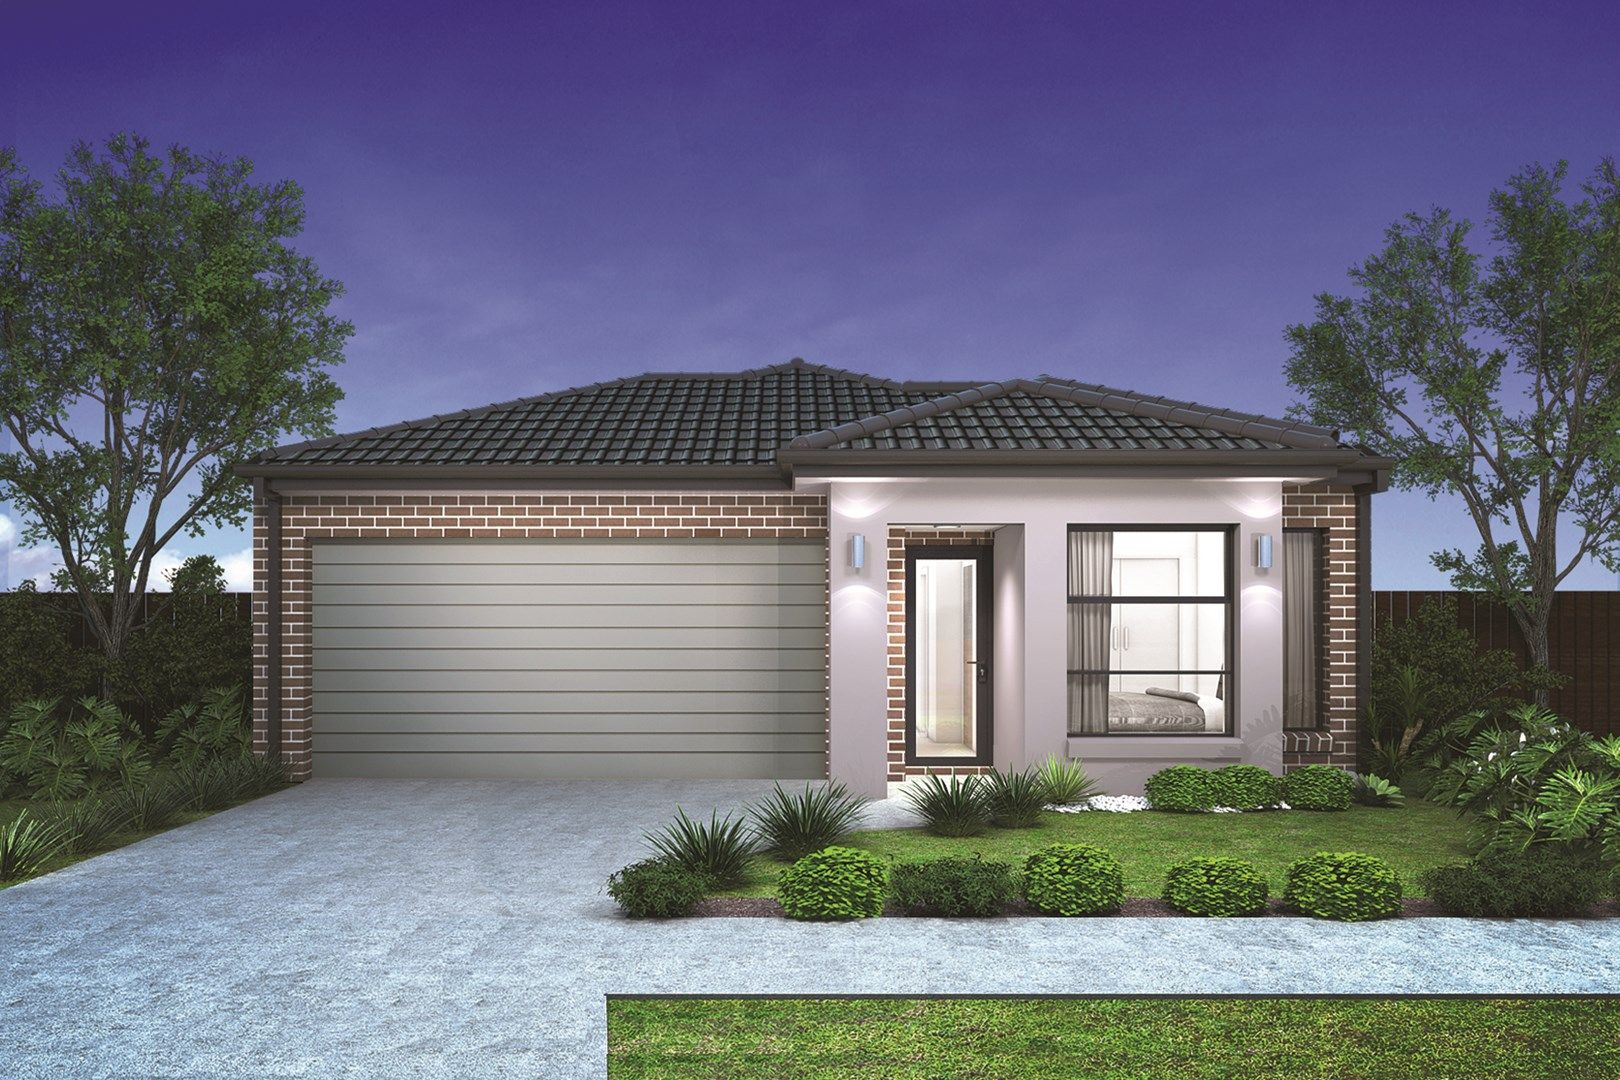 3 bedrooms New House & Land in Lot 2152 Mangioni Drive DEANSIDE VIC, 3336